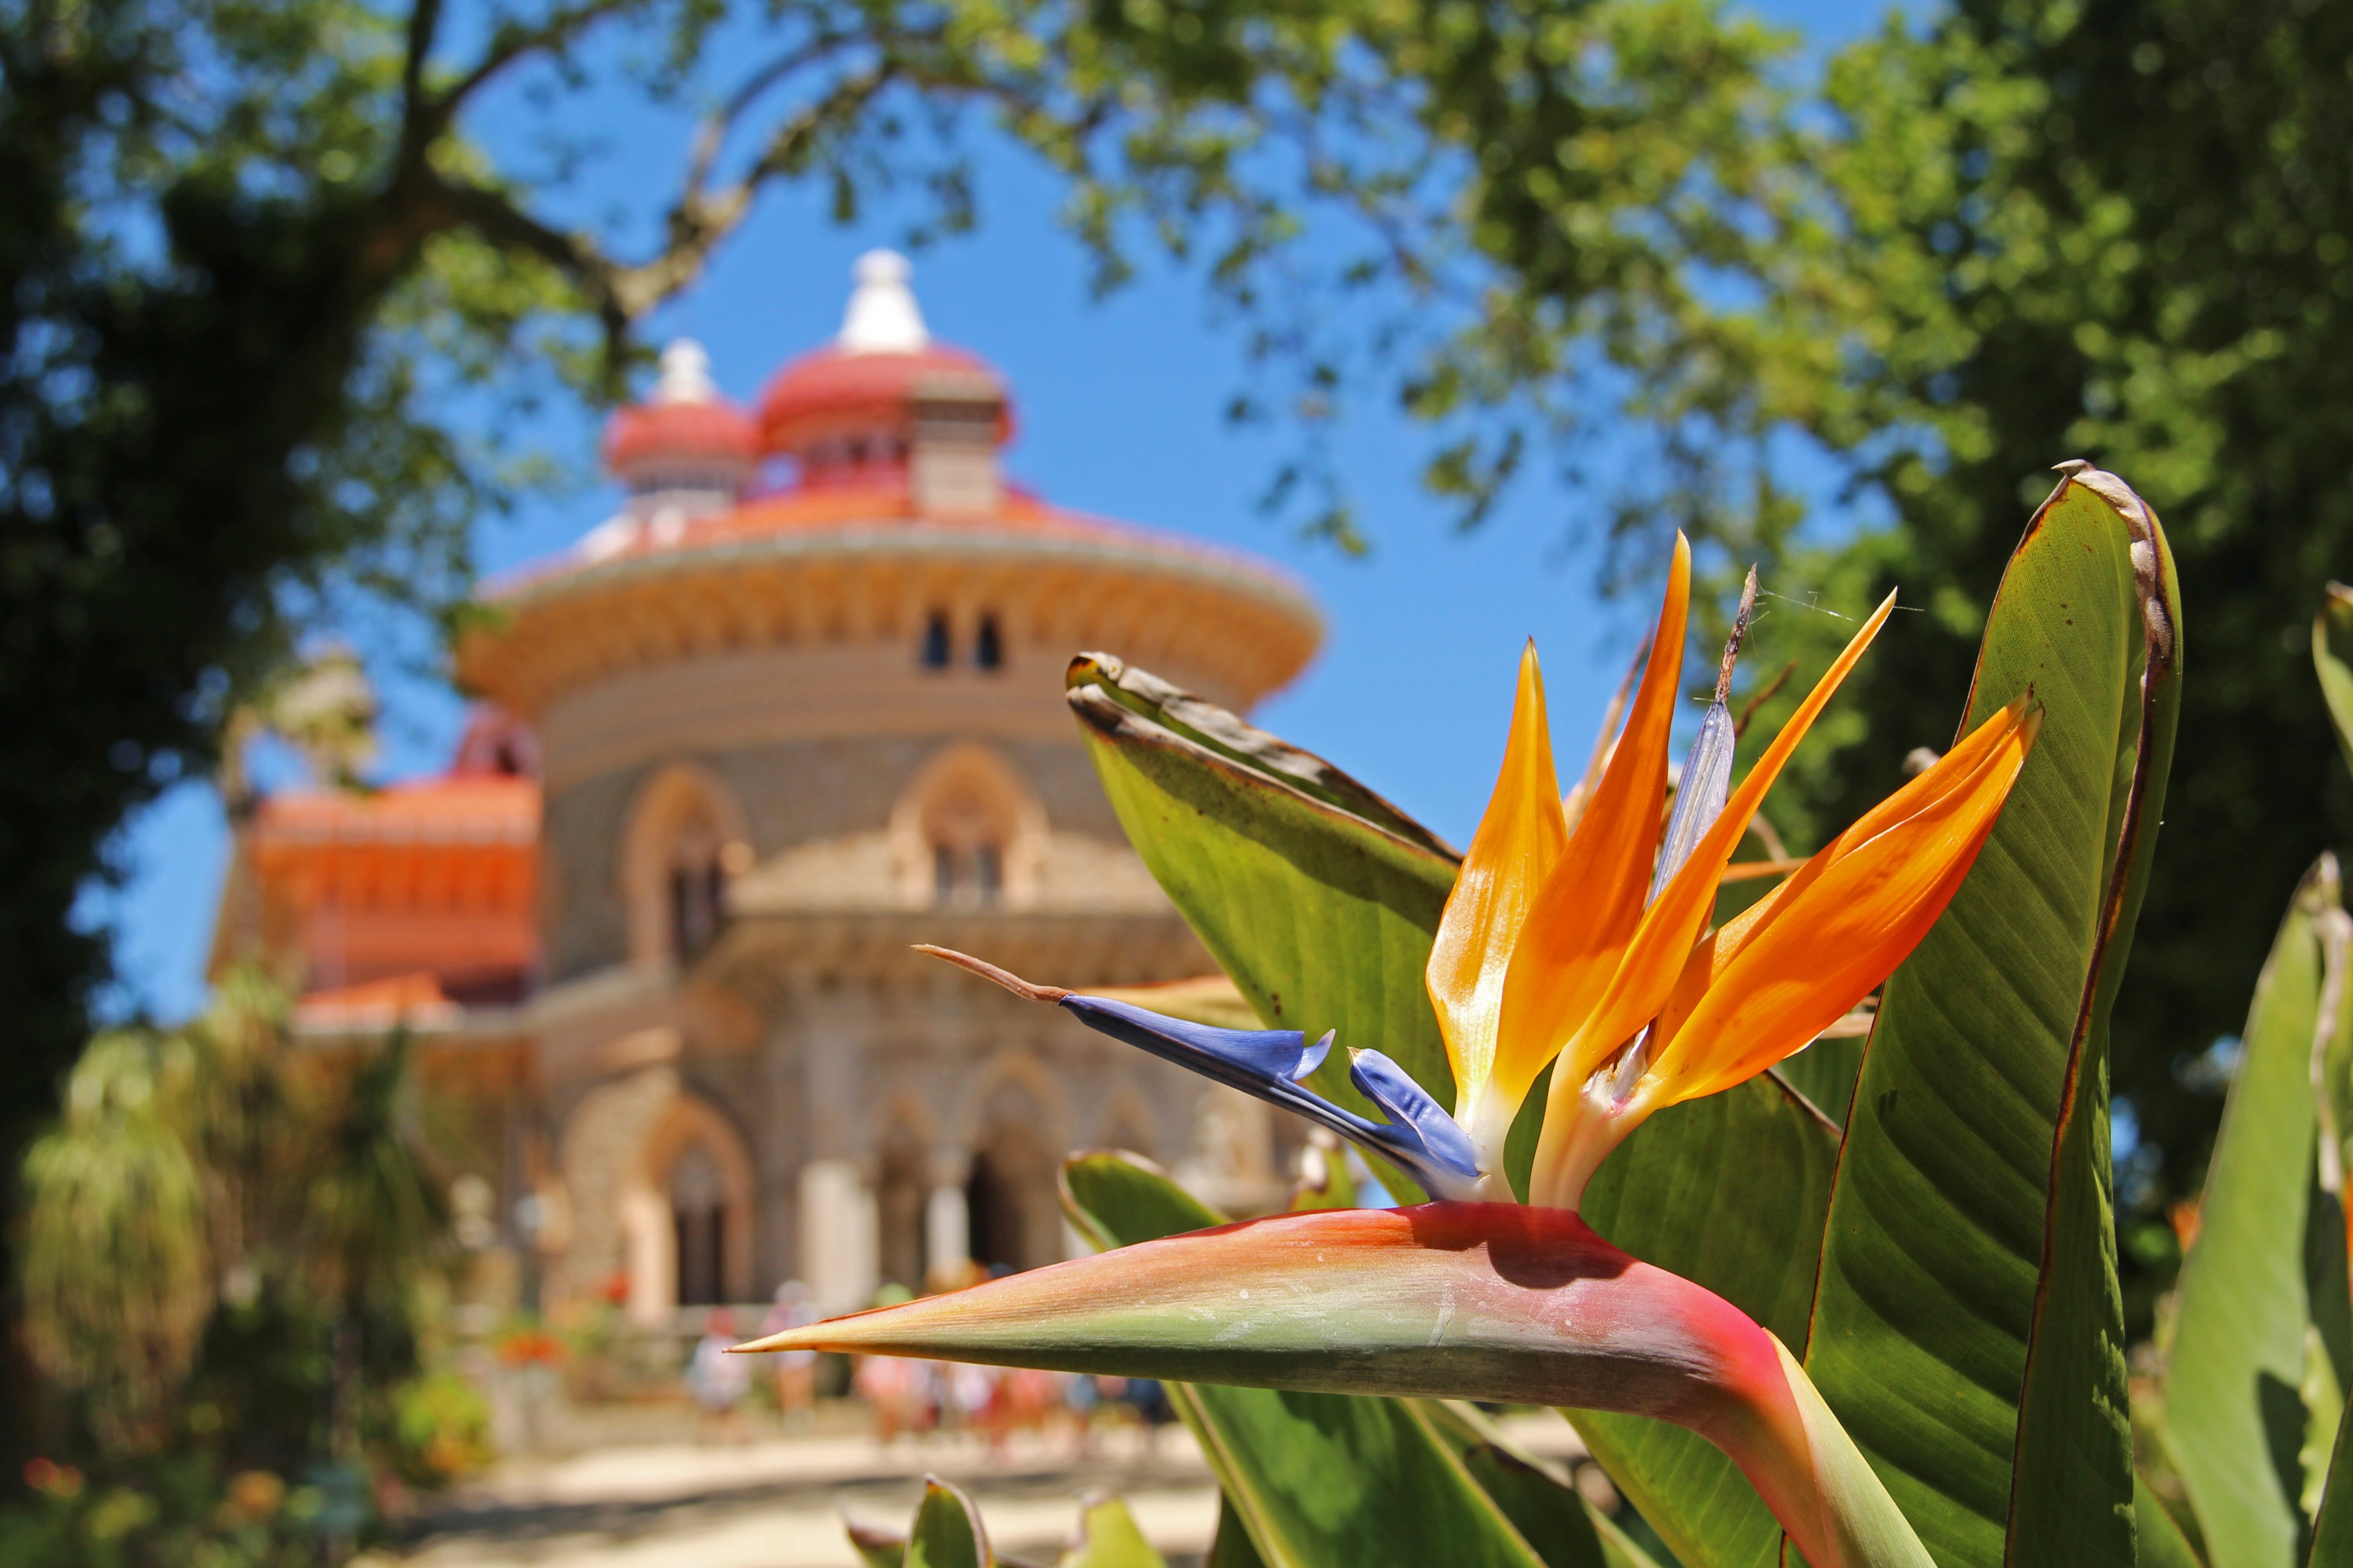 Gardens outside the Palace of Monserrate in Sintra (27998693116)